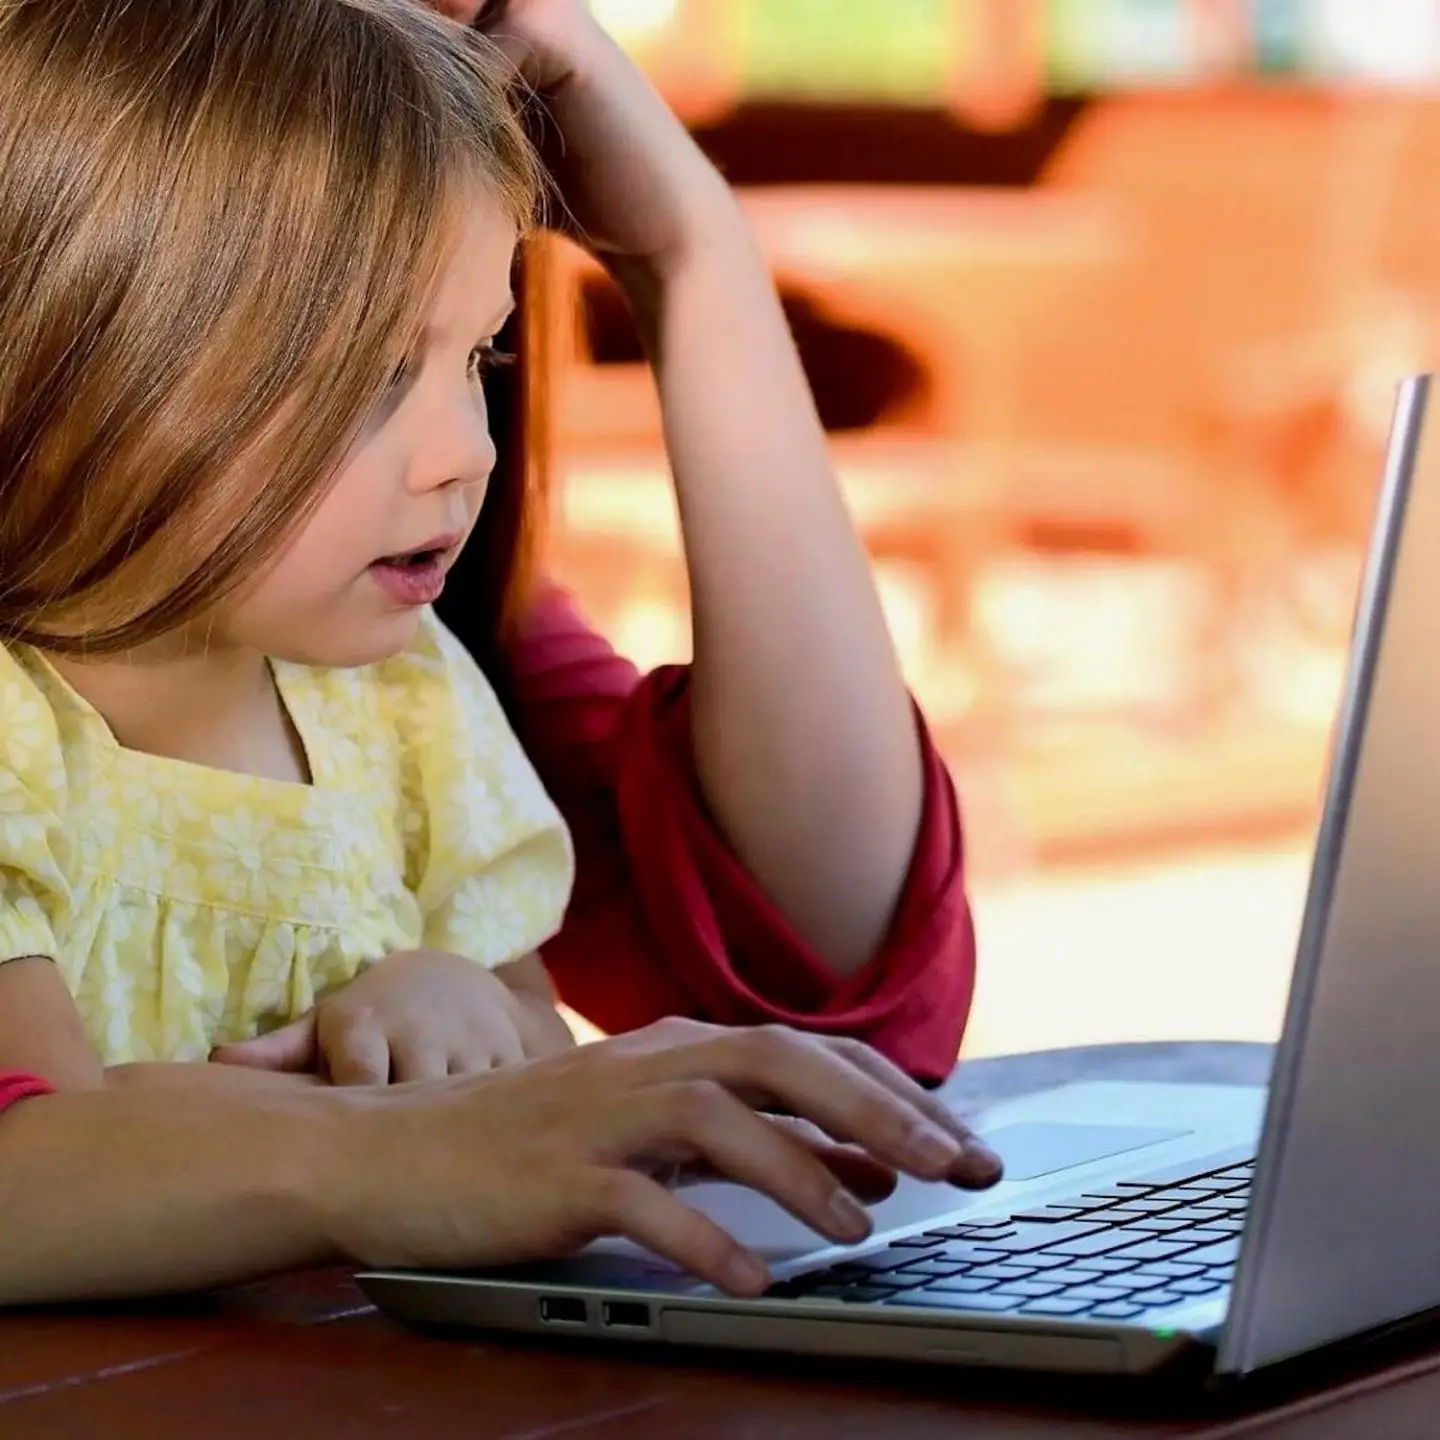 A little girl sitting looking at a laptop